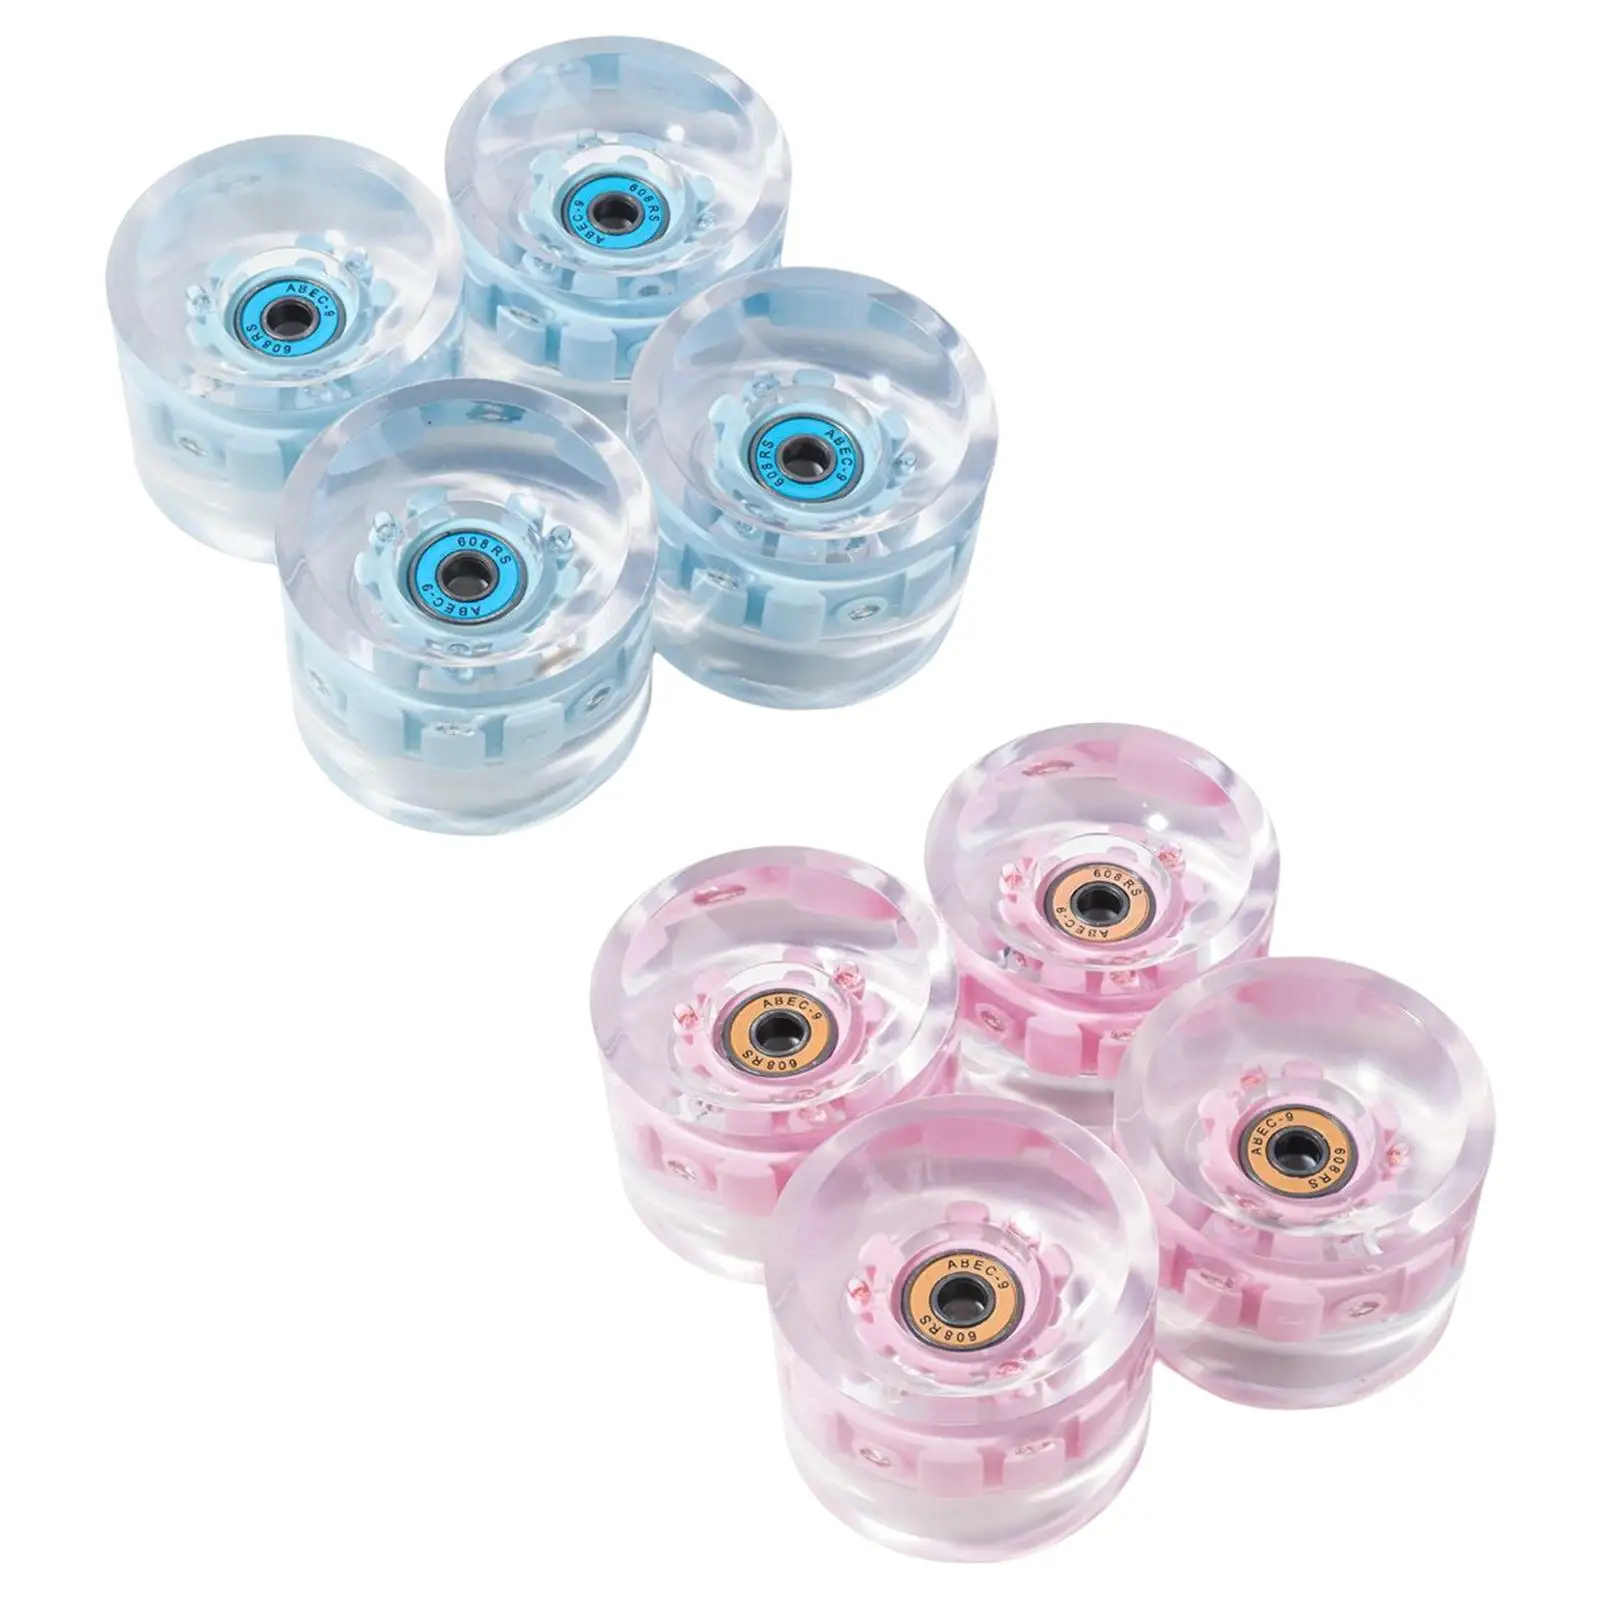 Skateboard Wheels with Bearings Replacement 78A with LED Light Luminous Roller Skate Wheels for Skateboard Longboard Indoor Park